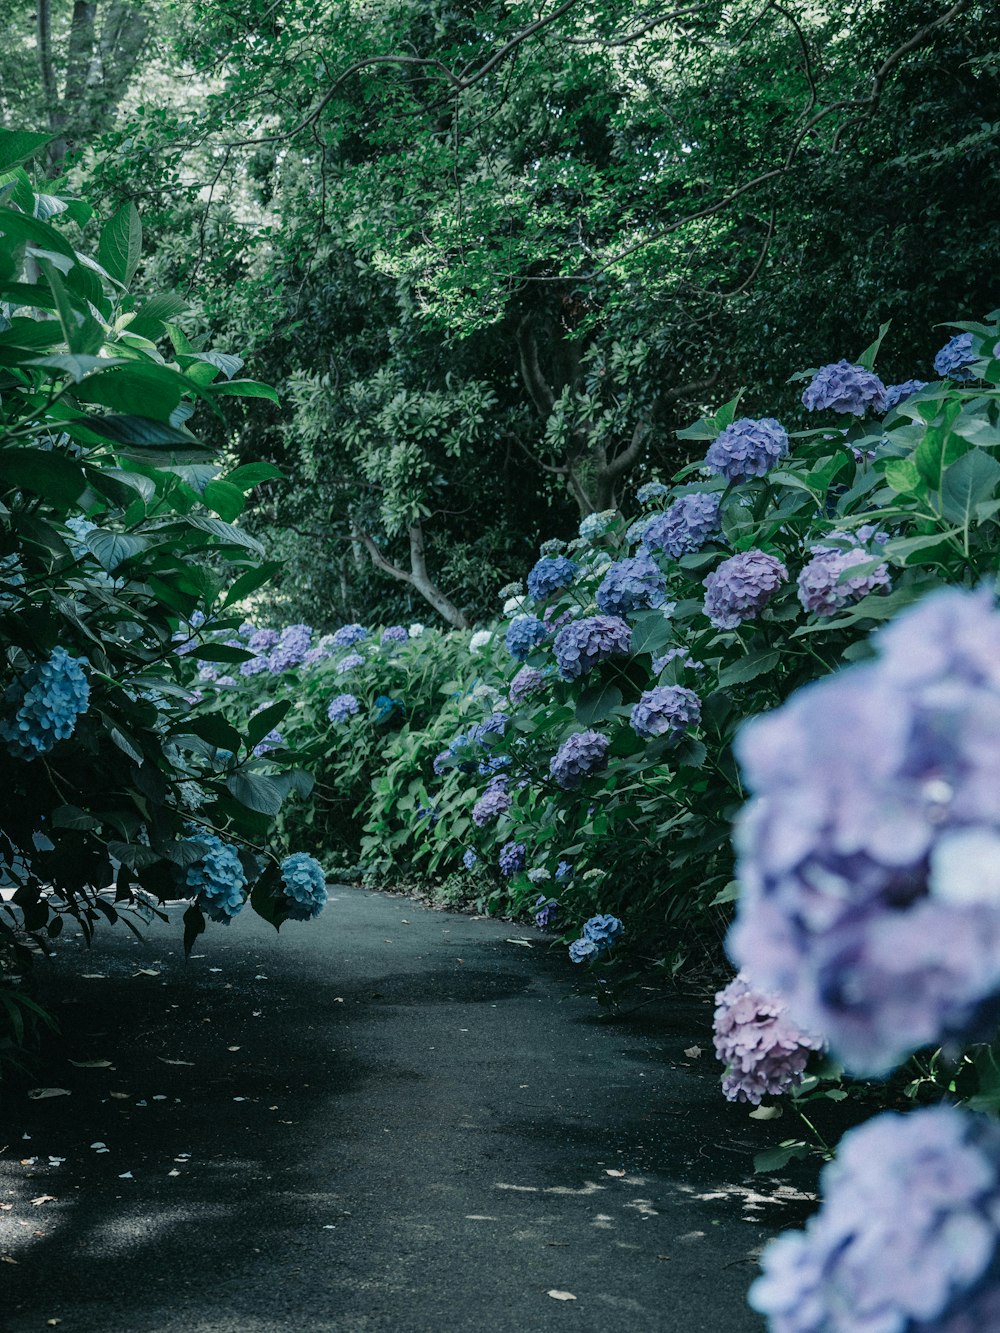 a pathway lined with lots of purple and blue flowers